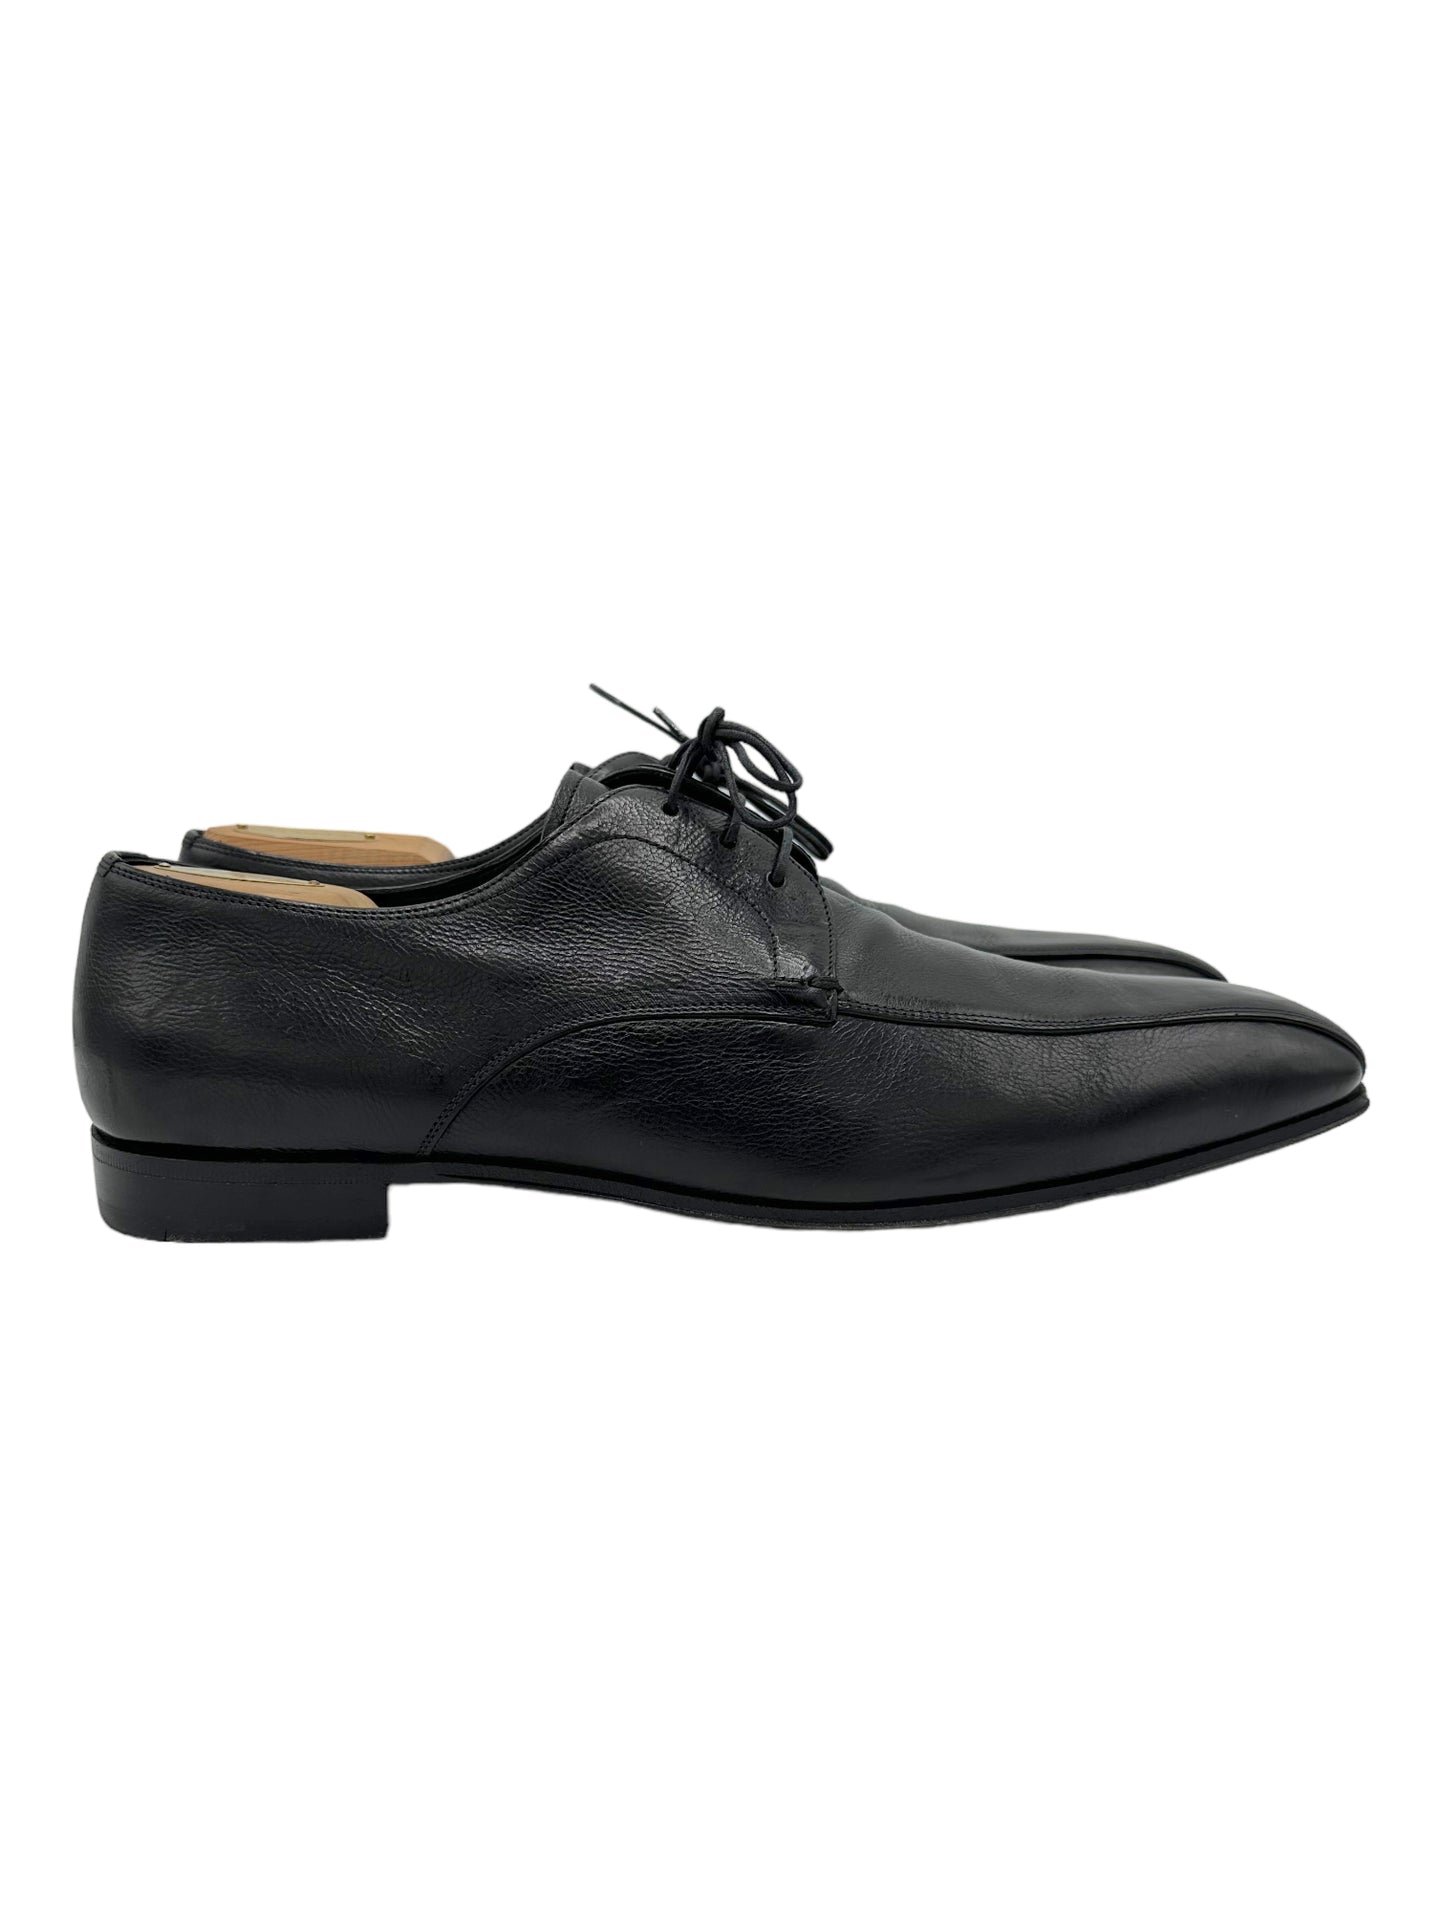 Prada Black Grained Leather Slim Derby Dress Shoes - Genuine Design Luxury Consignment. New & Pre-Owned Clothing, Shoes, & Accessories. Calgary, Canada